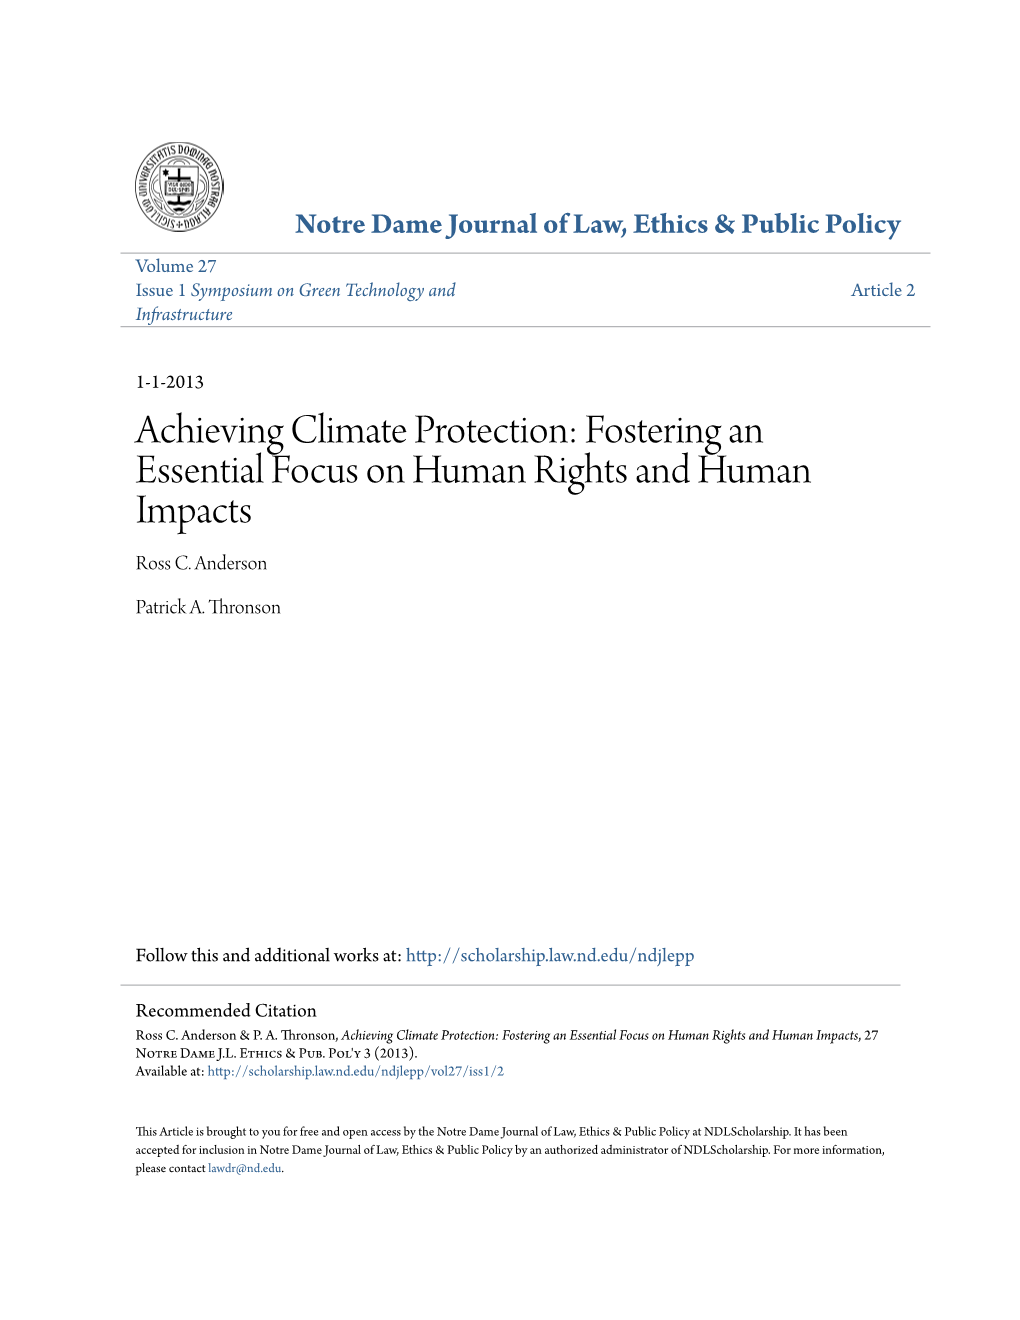 Achieving Climate Protection: Fostering an Essential Focus on Human Rights and Human Impacts Ross C